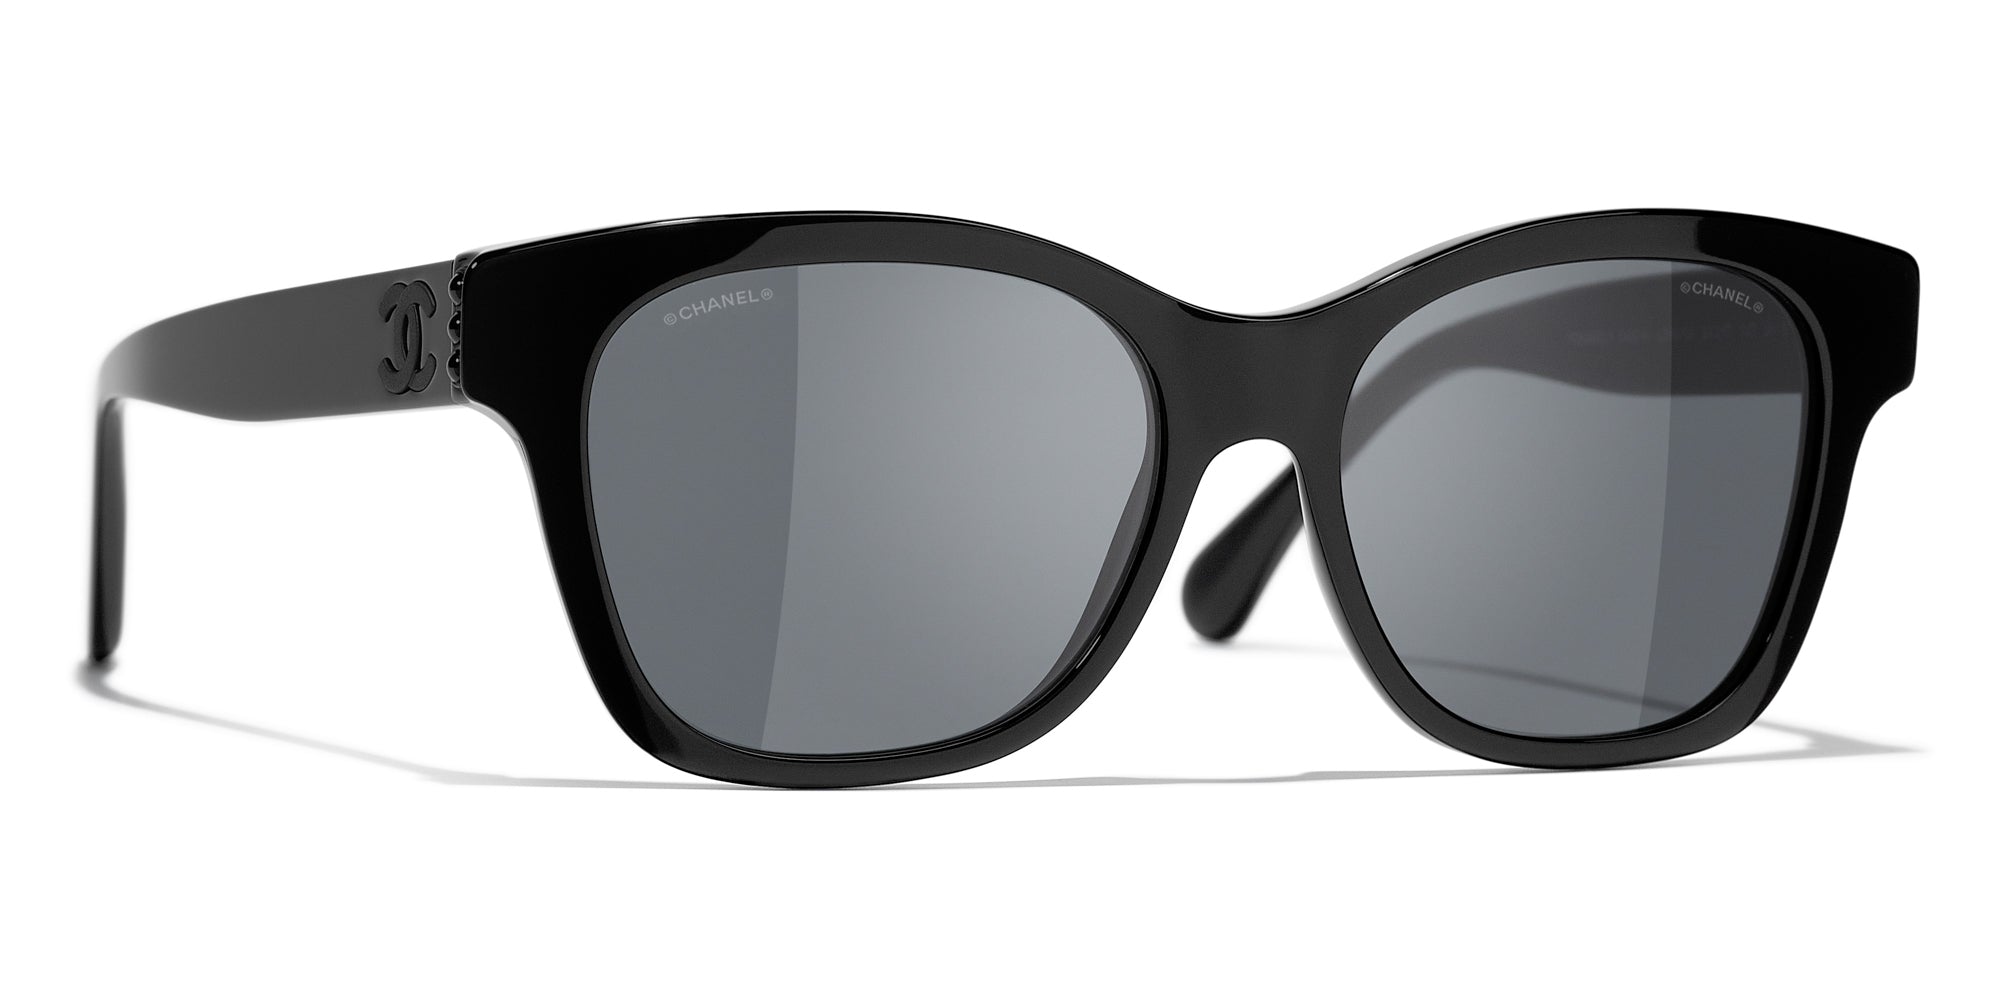 lv sunglass - Eyewear Prices and Promotions - Fashion Accessories Nov 2023